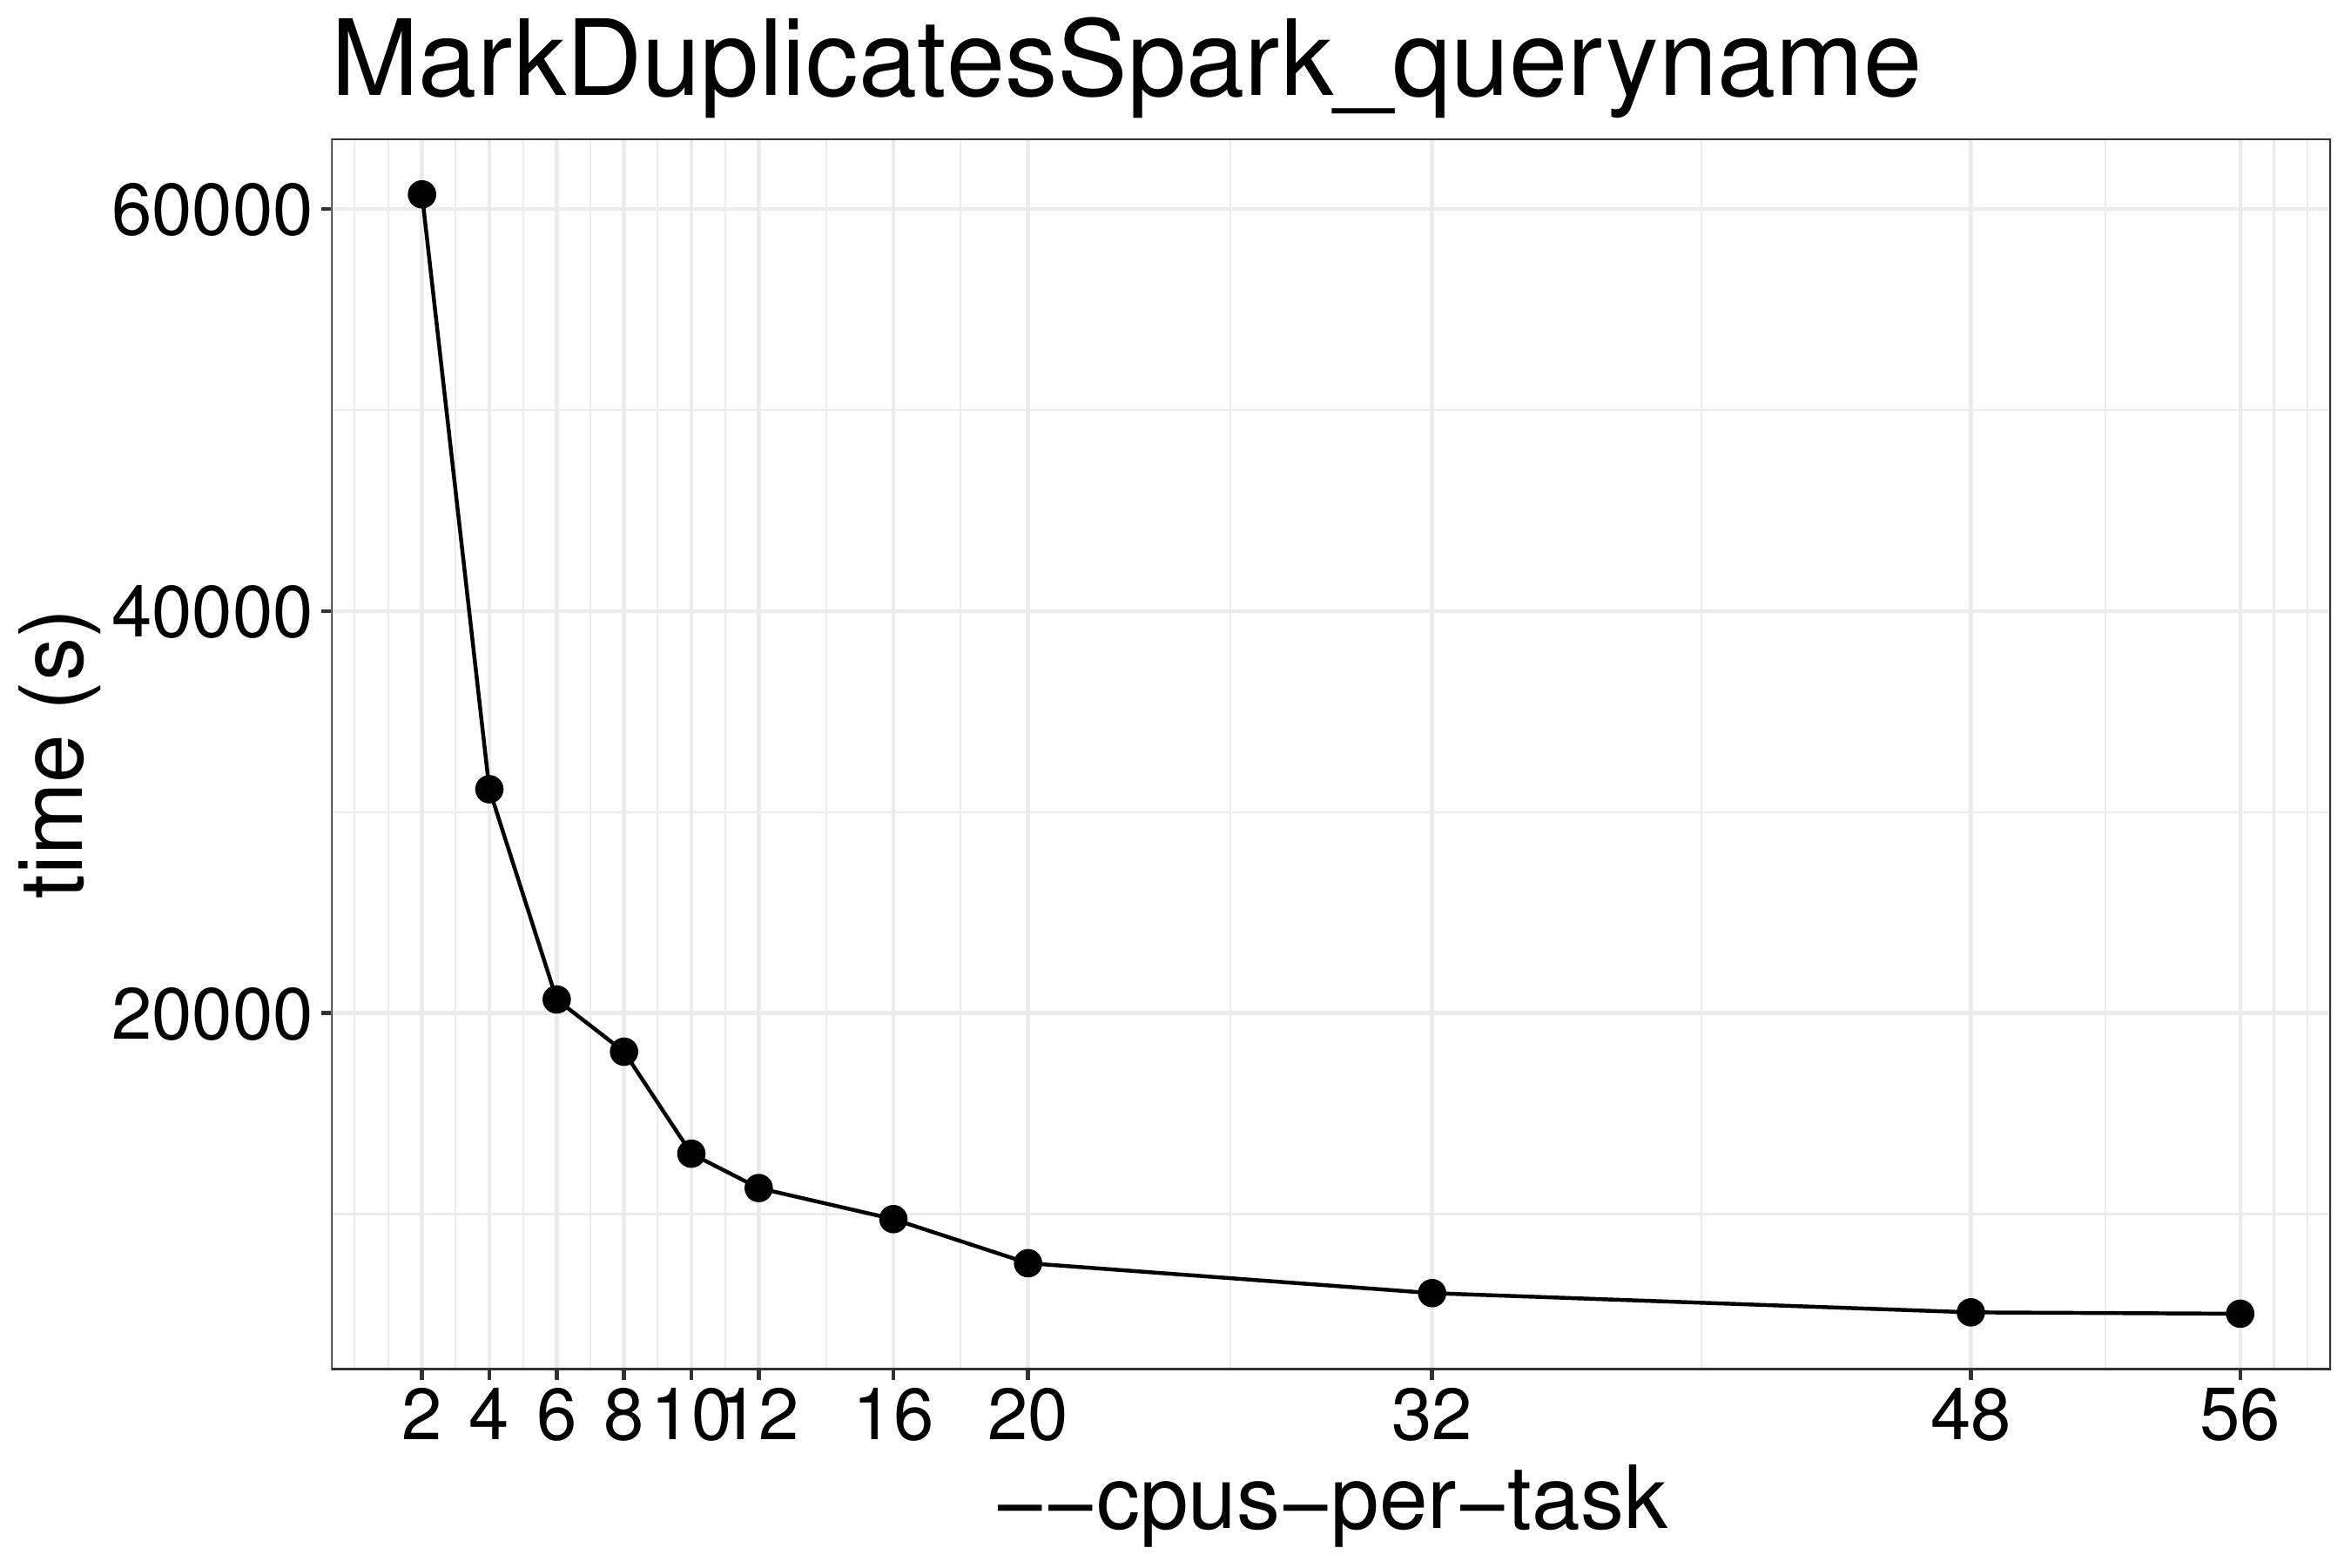 MarkDuplicatesSpark runtime with different numbers of threads.